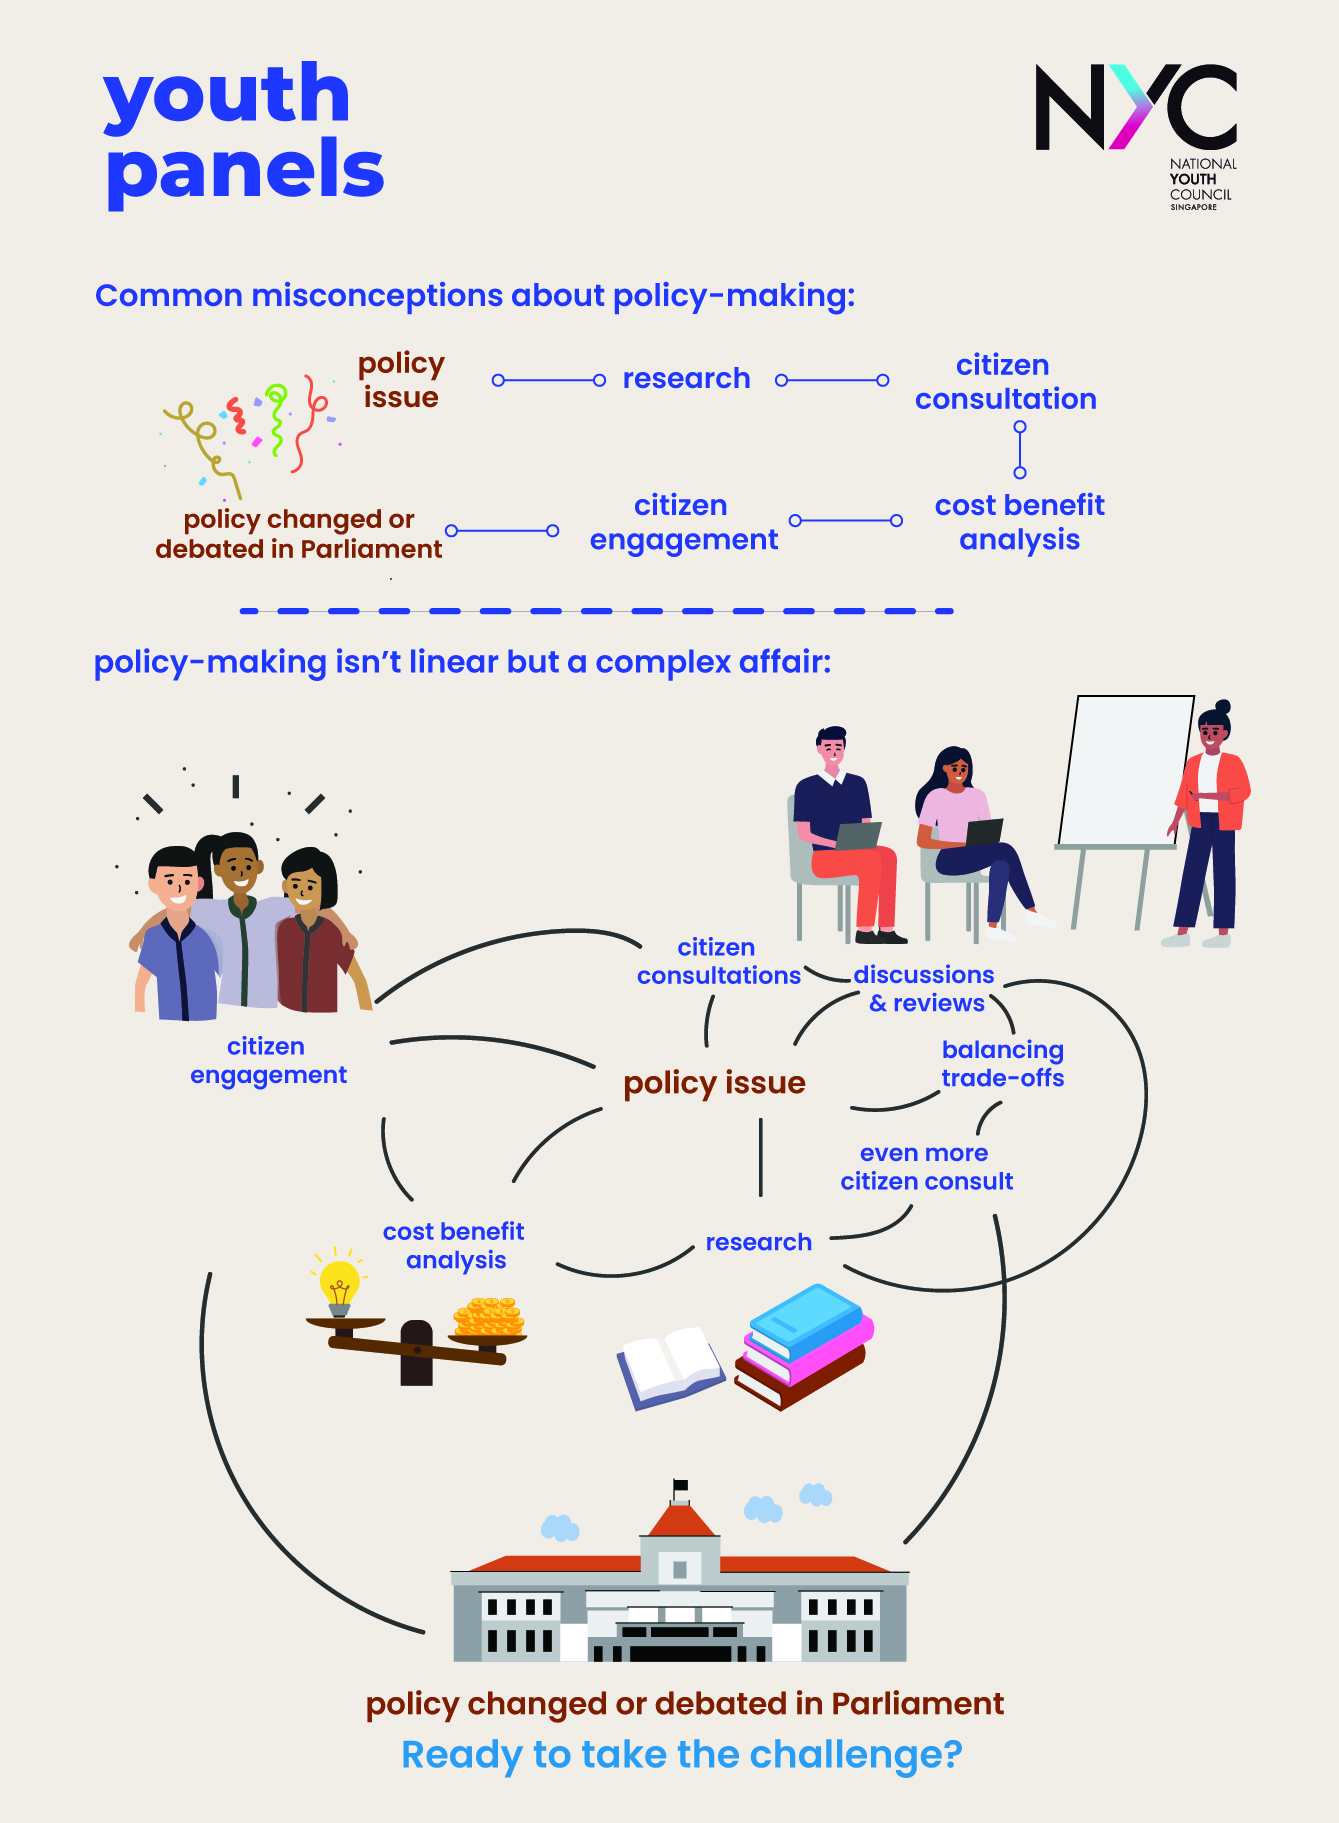 national-youth-council-nyc-singapore-youth-panels-infographic-illustration-complex-policy-making-process-for-youth-panel-members